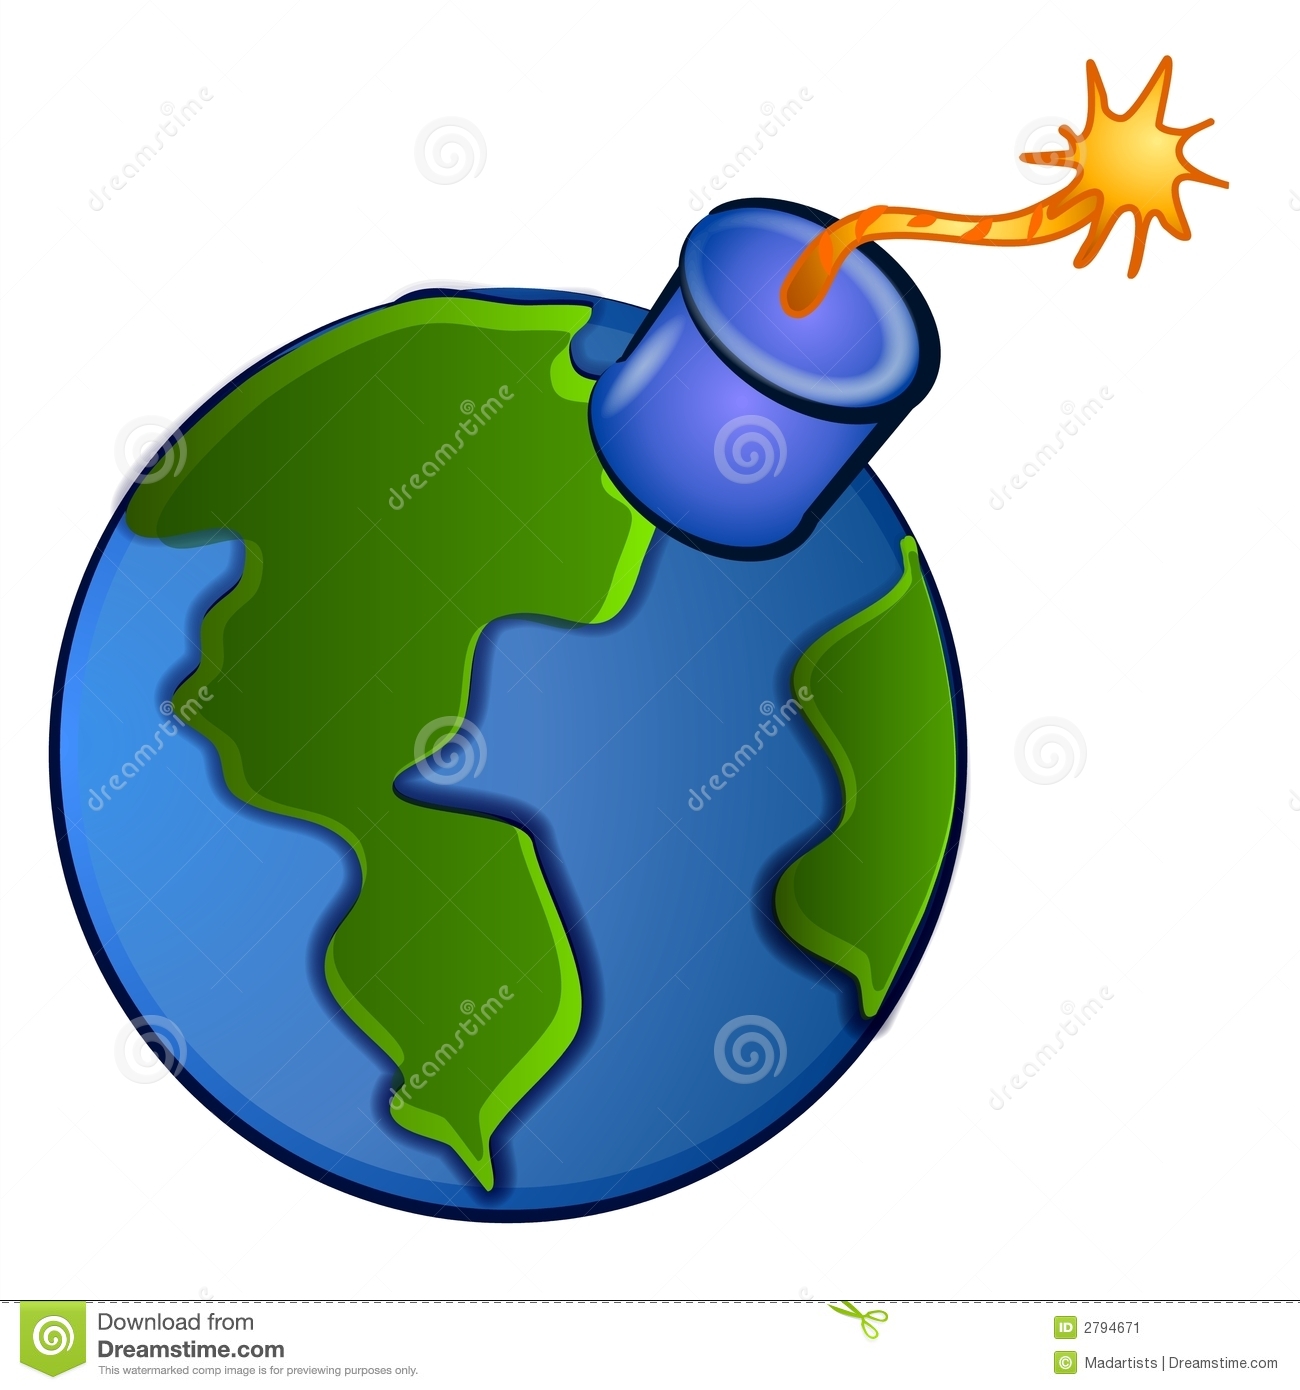 Clip Art Illustration Earth As A Bomb With A Lighted Spark And Ready